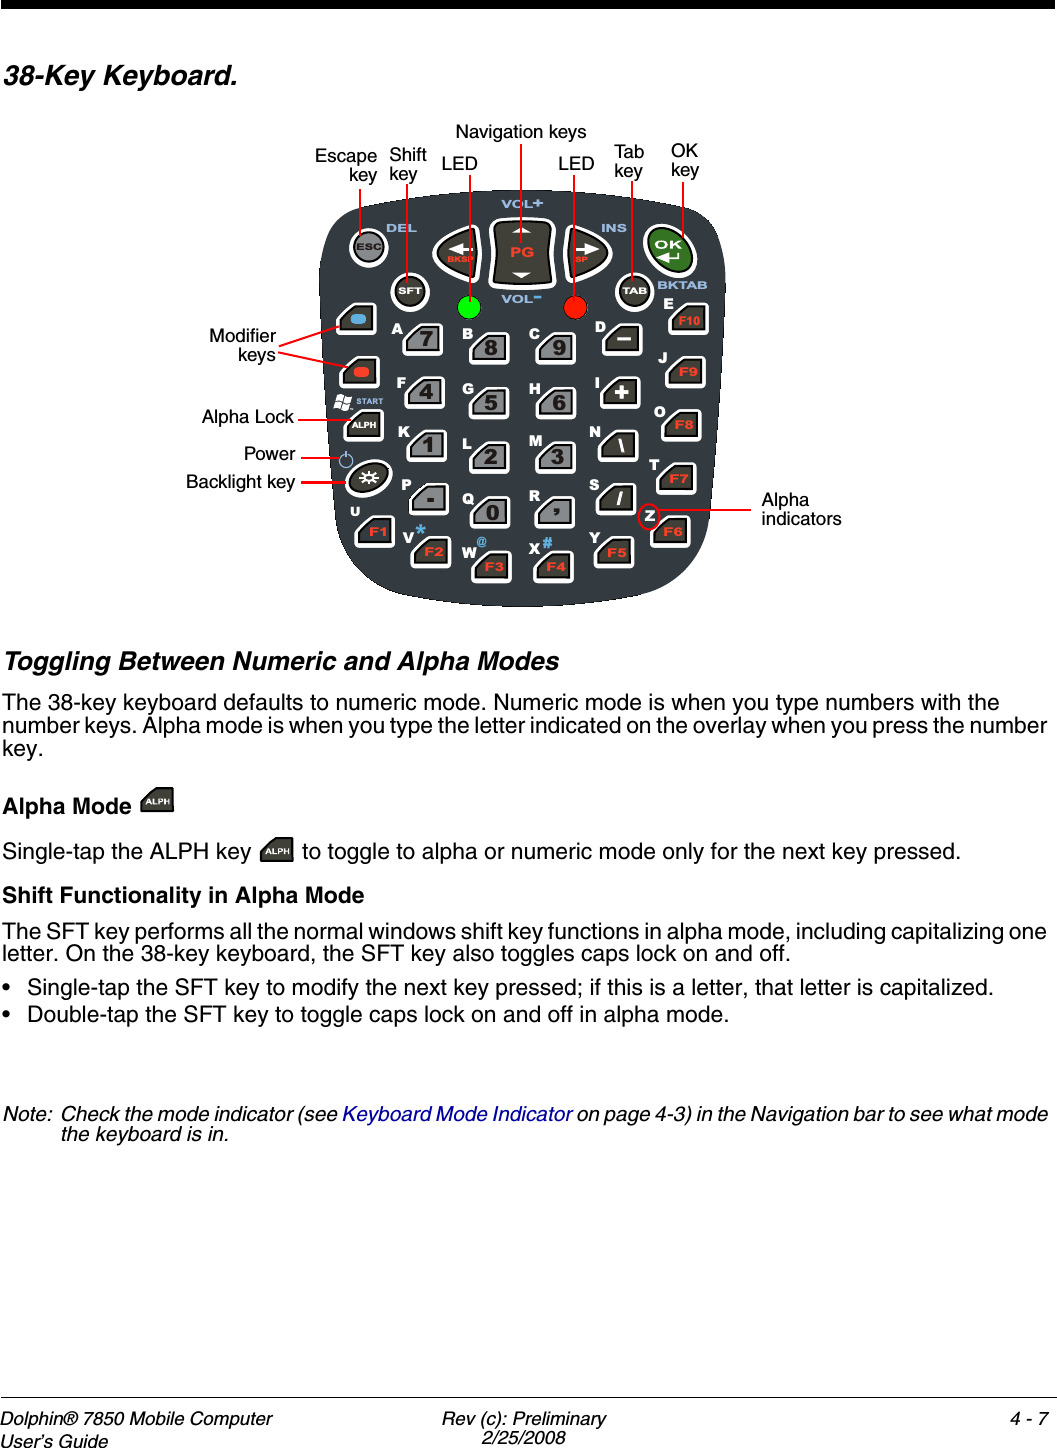 Dolphin® 7850 Mobile Computer  User’s Guide Rev (c): Preliminary2/25/20084 - 738-Key Keyboard.Toggling Between Numeric and Alpha Modes The 38-key keyboard defaults to numeric mode. Numeric mode is when you type numbers with the number keys. Alpha mode is when you type the letter indicated on the overlay when you press the number key. Alpha Mode Single-tap the ALPH key   to toggle to alpha or numeric mode only for the next key pressed. Shift Functionality in Alpha ModeThe SFT key performs all the normal windows shift key functions in alpha mode, including capitalizing one letter. On the 38-key keyboard, the SFT key also toggles caps lock on and off.• Single-tap the SFT key to modify the next key pressed; if this is a letter, that letter is capitalized.• Double-tap the SFT key to toggle caps lock on and off in alpha mode.Note: Check the mode indicator (see Keyboard Mode Indicator on page 4-3) in the Navigation bar to see what mode the keyboard is in.F4F5F6F7F8F9F10-+\\//,3690258741.BKSPPGSPTA BESCALPHF1F2F3SFTOBEJUACDFGHIKLMNQSTVWXYZST ART P#*@DELVOL+VOL-INSRBKTABEscapekeyPowerBacklight keyOK keyNavigation keysTab  keyAlpha indicators ModifierkeysShift key LED LEDAlpha Lock